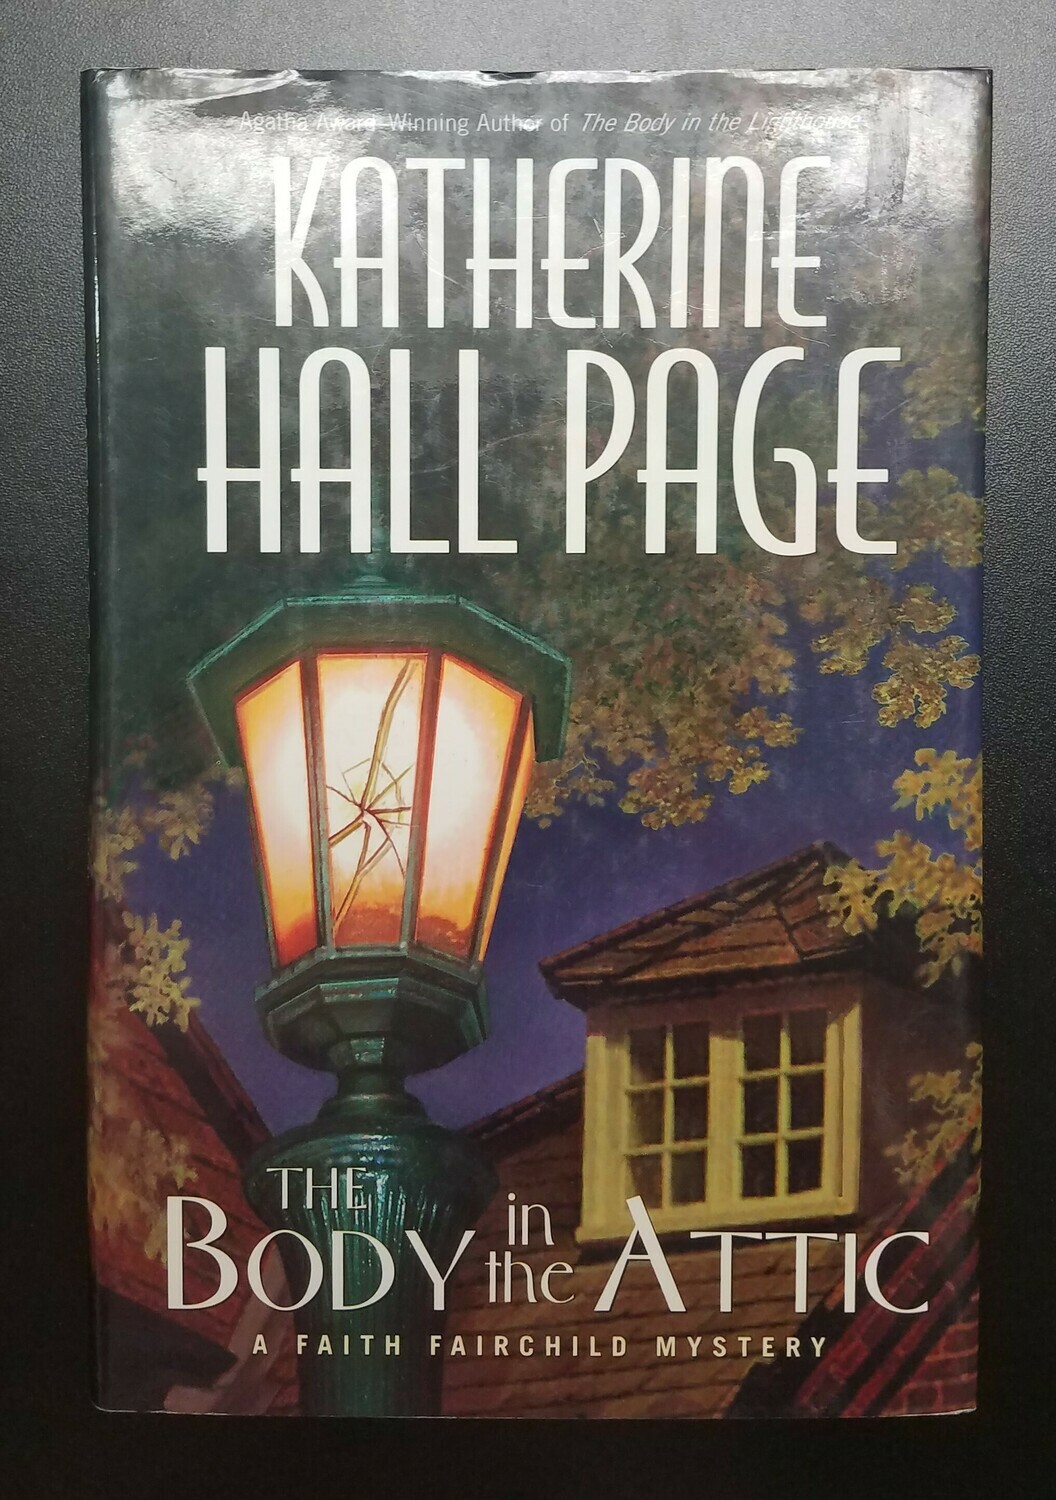 The Body in the Attic by Katherine Hall Page